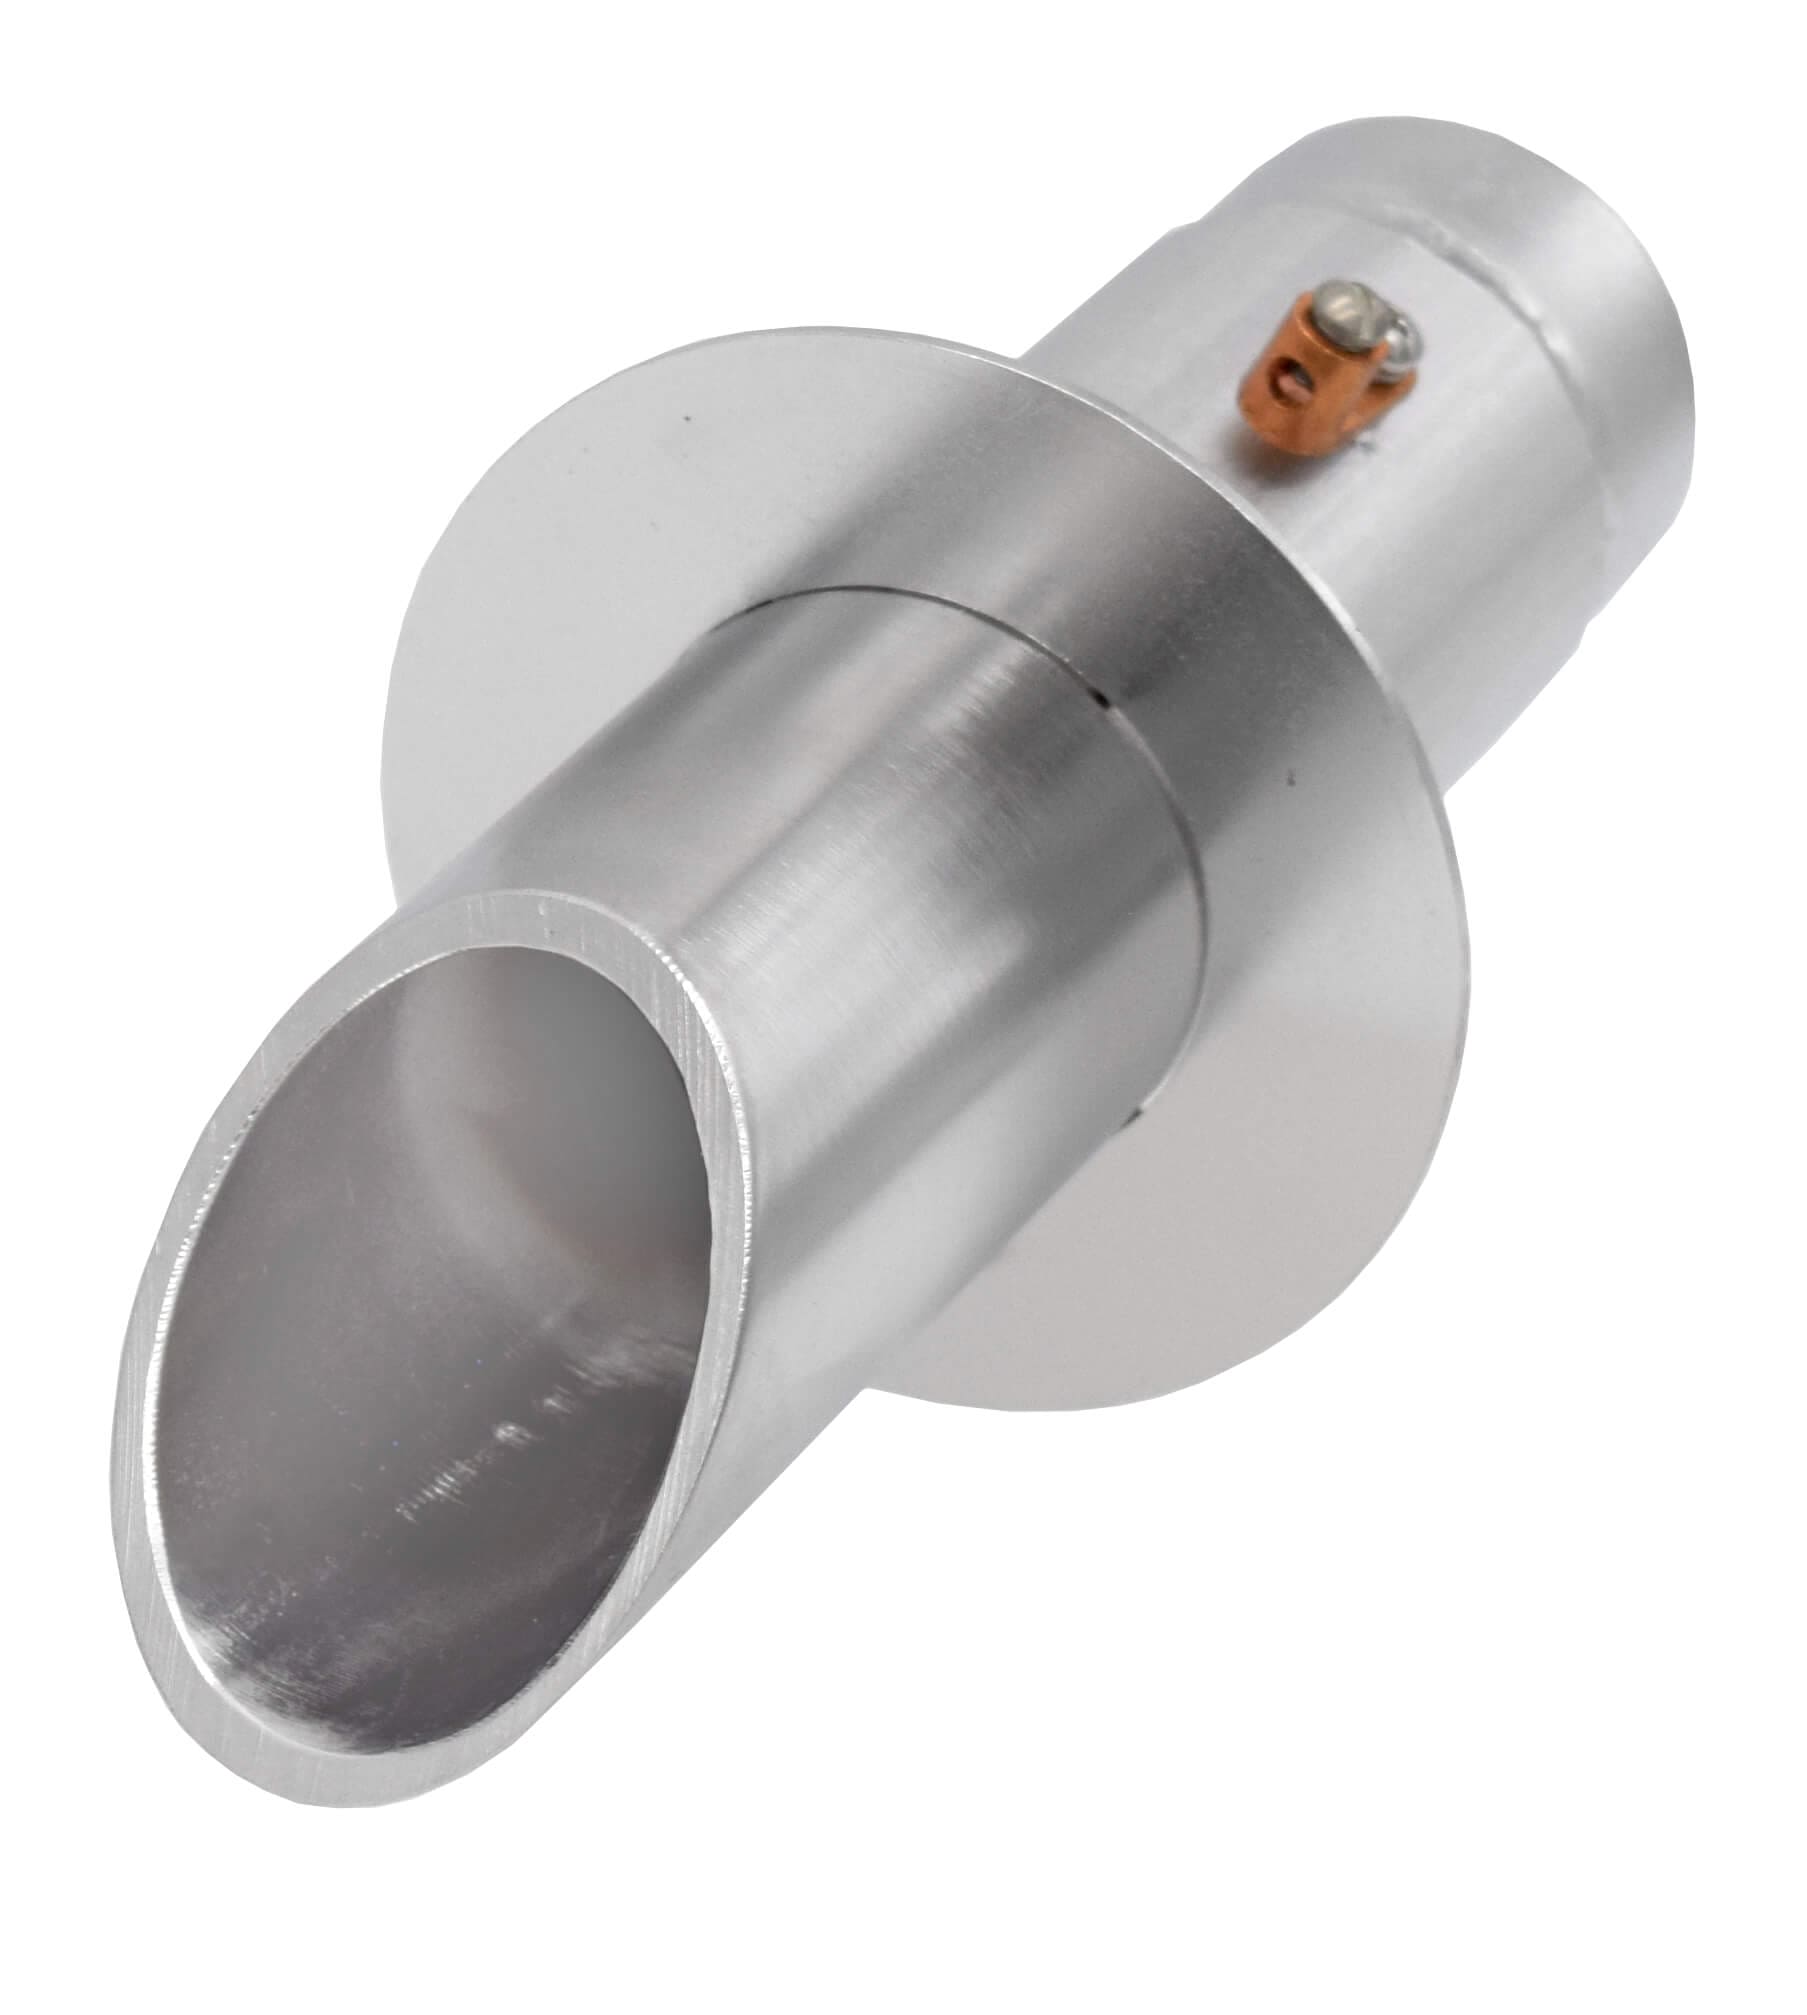 EasyPro Fountain Basalt EasyPro Vianti Falls Stainless Wall Round Scupper with Round Wall Plate - 2-in.